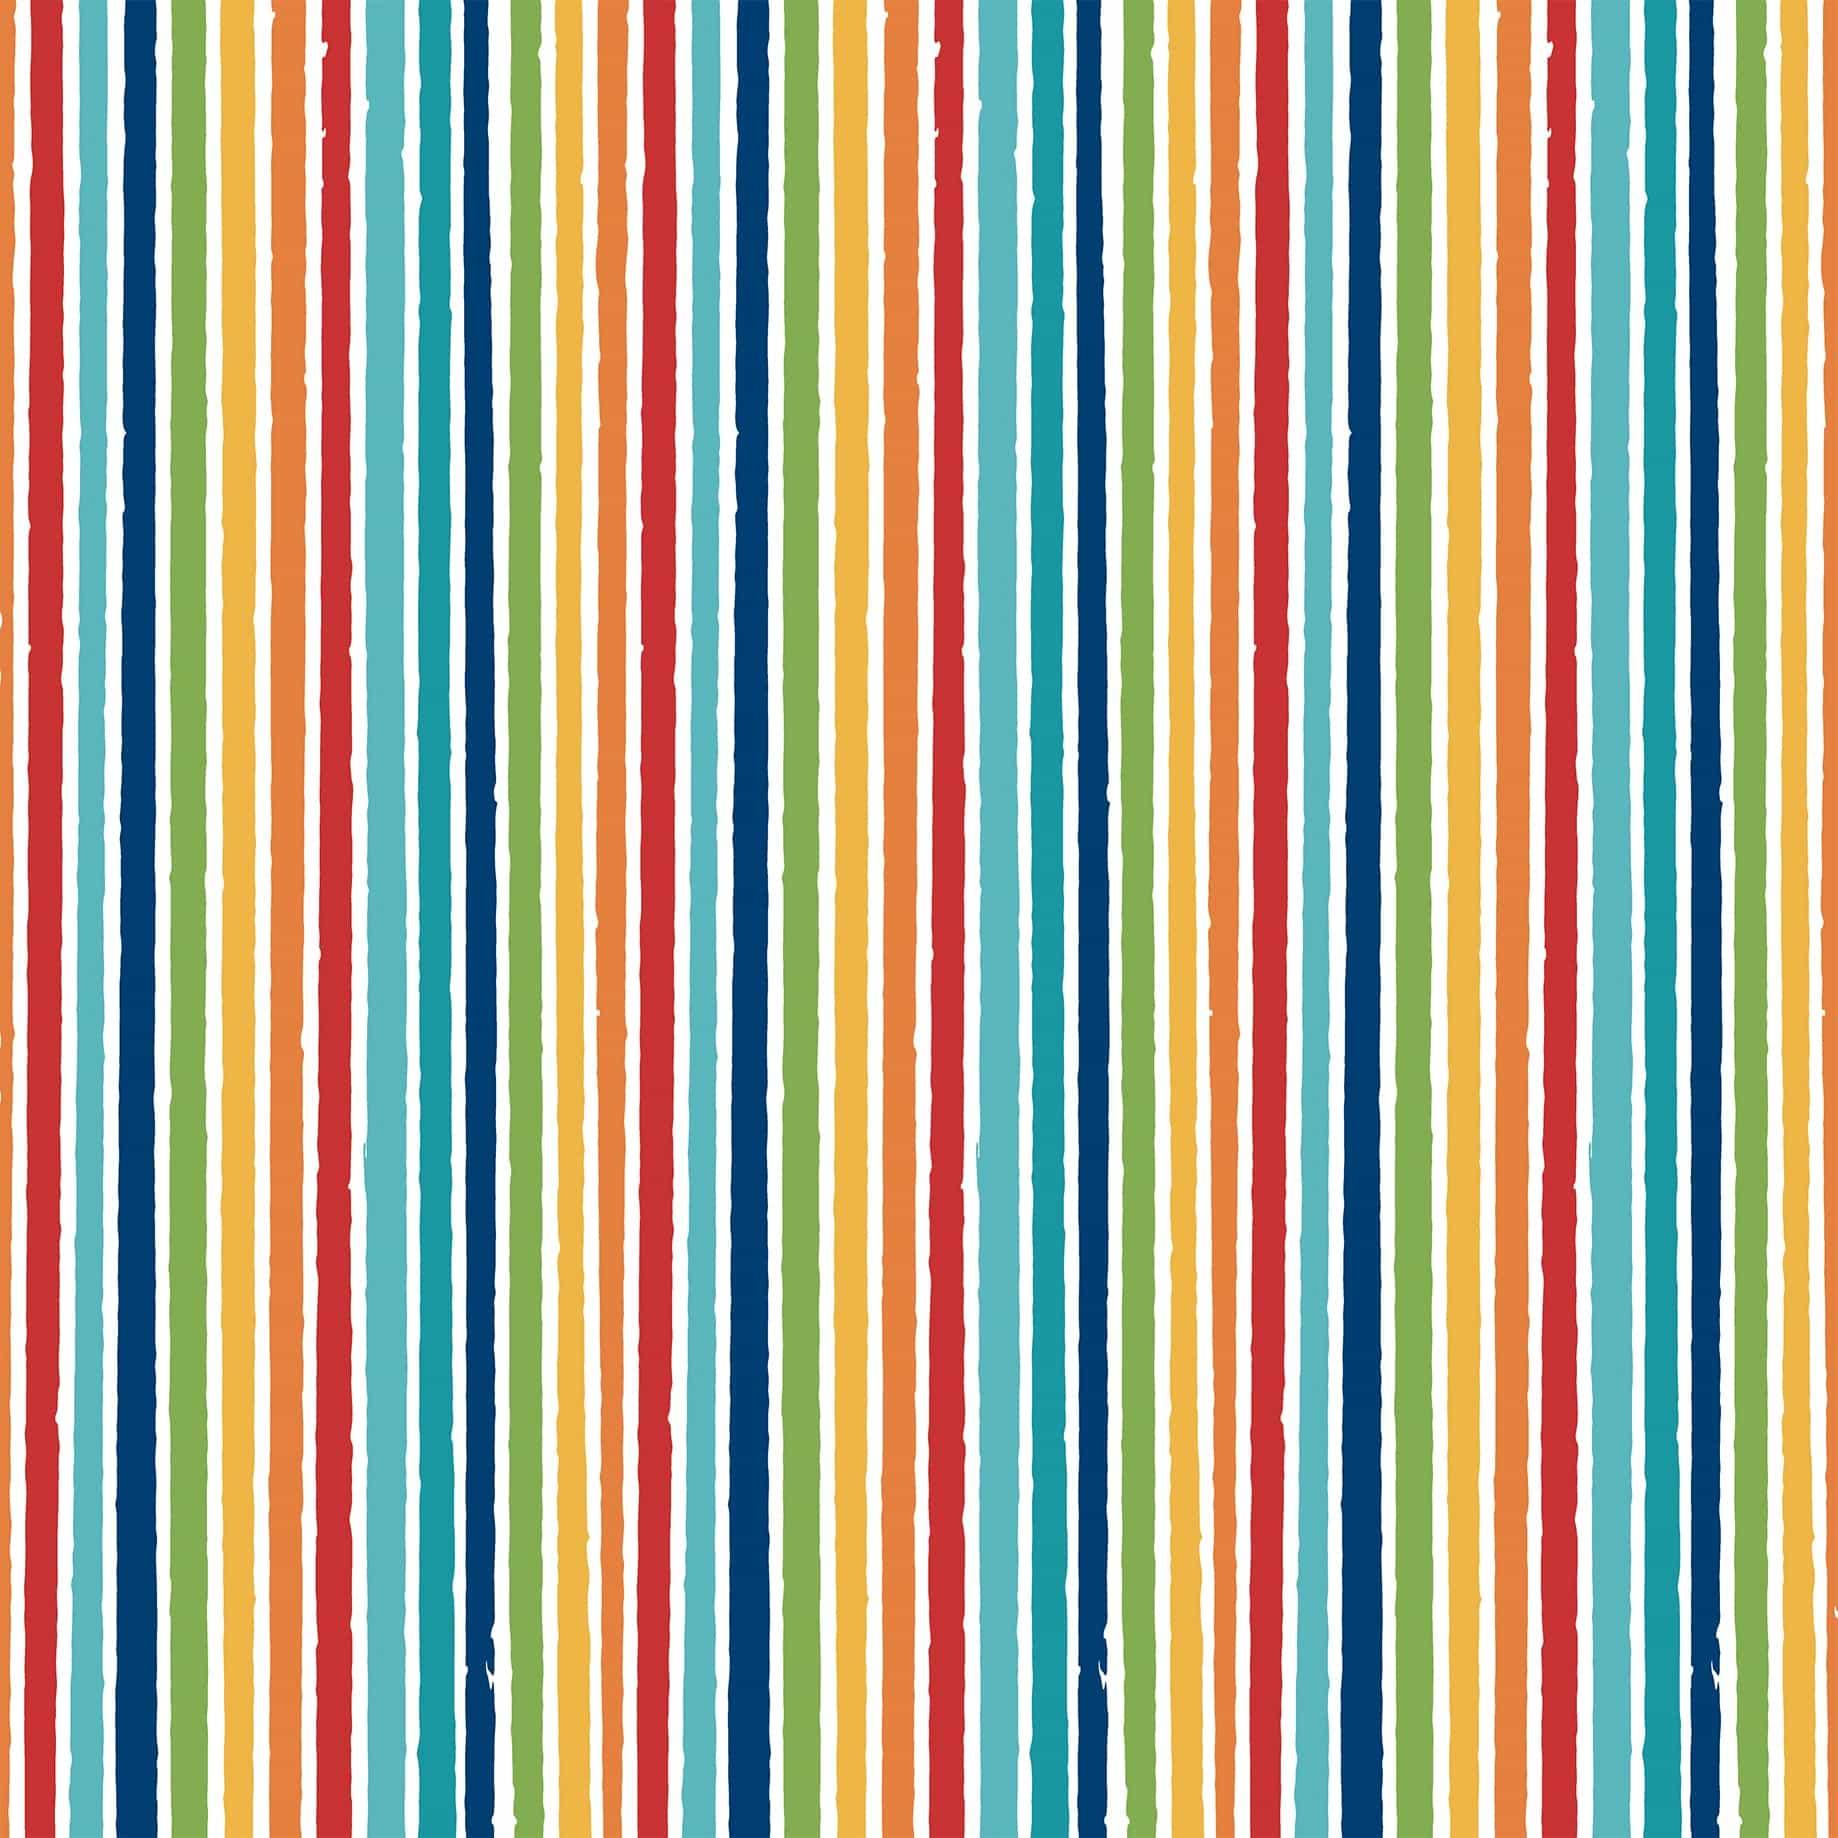 Pets Collection Bright Stripes 12 x 12 Double-Sided Scrapbook Paper by Echo Park Paper - Scrapbook Supply Companies